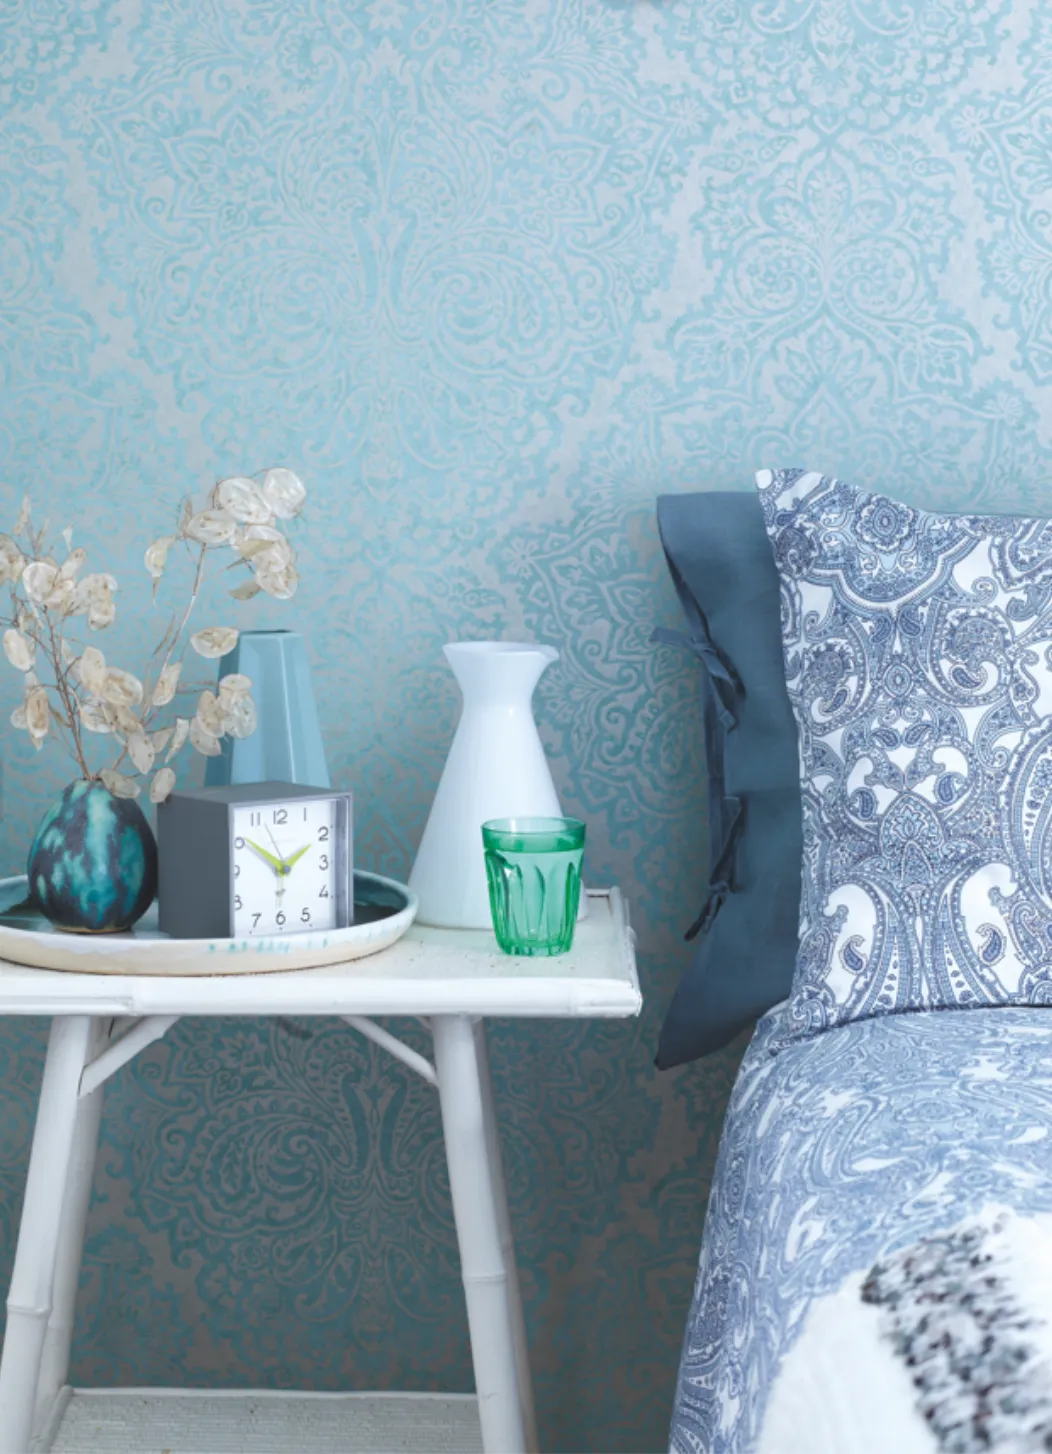 Bedroom makeover: 'I was determined to banish the bland on a budget'